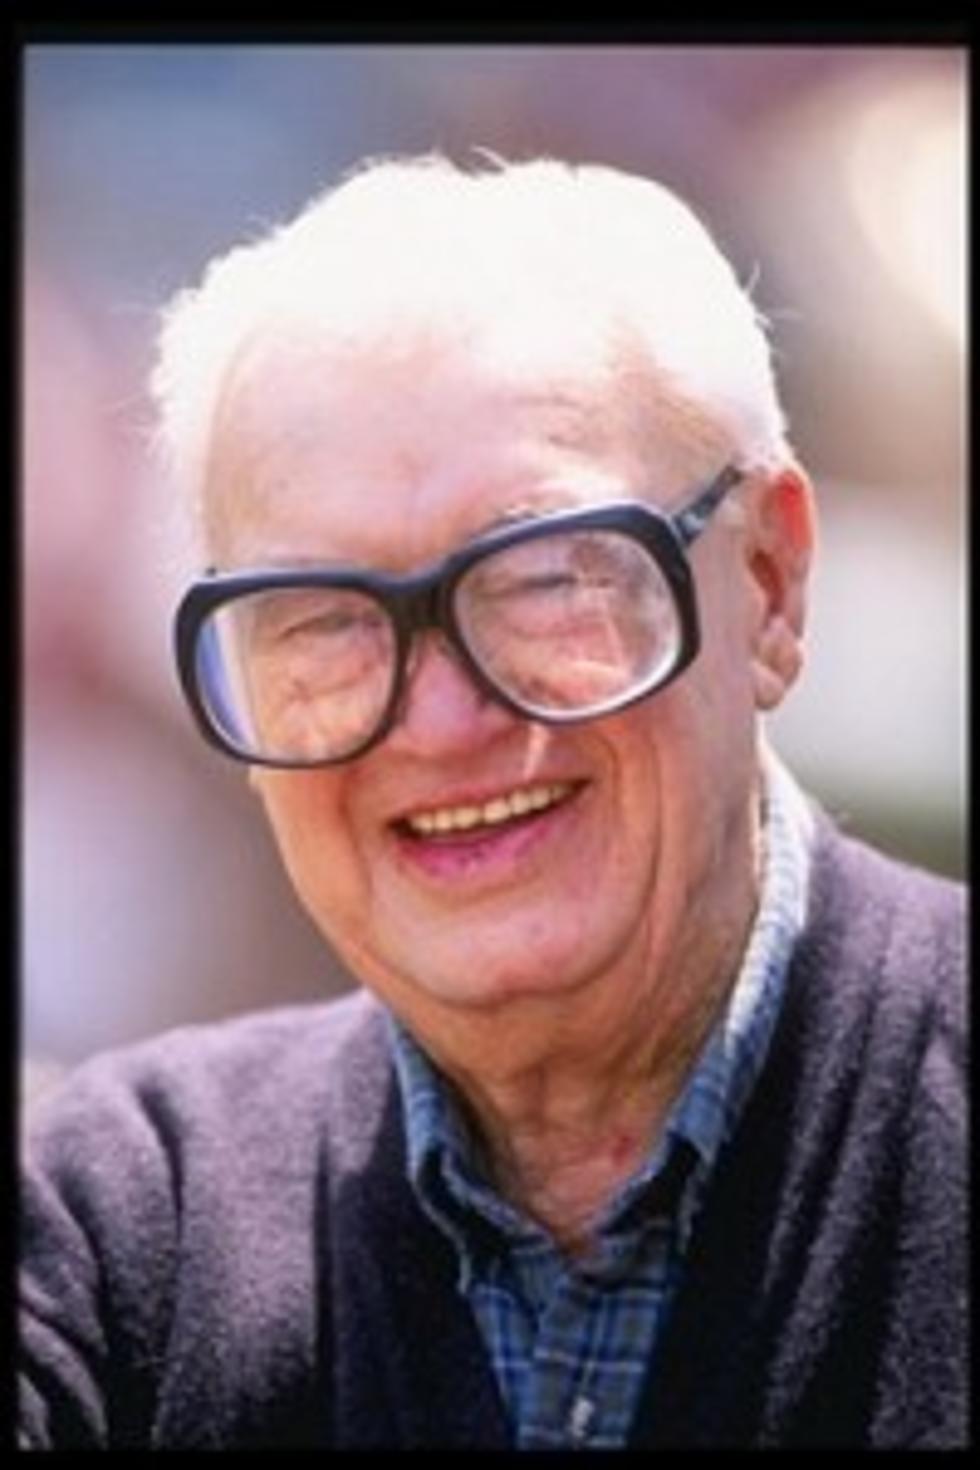 Holy Cow Stateline! Harry Caray would be 100 today!